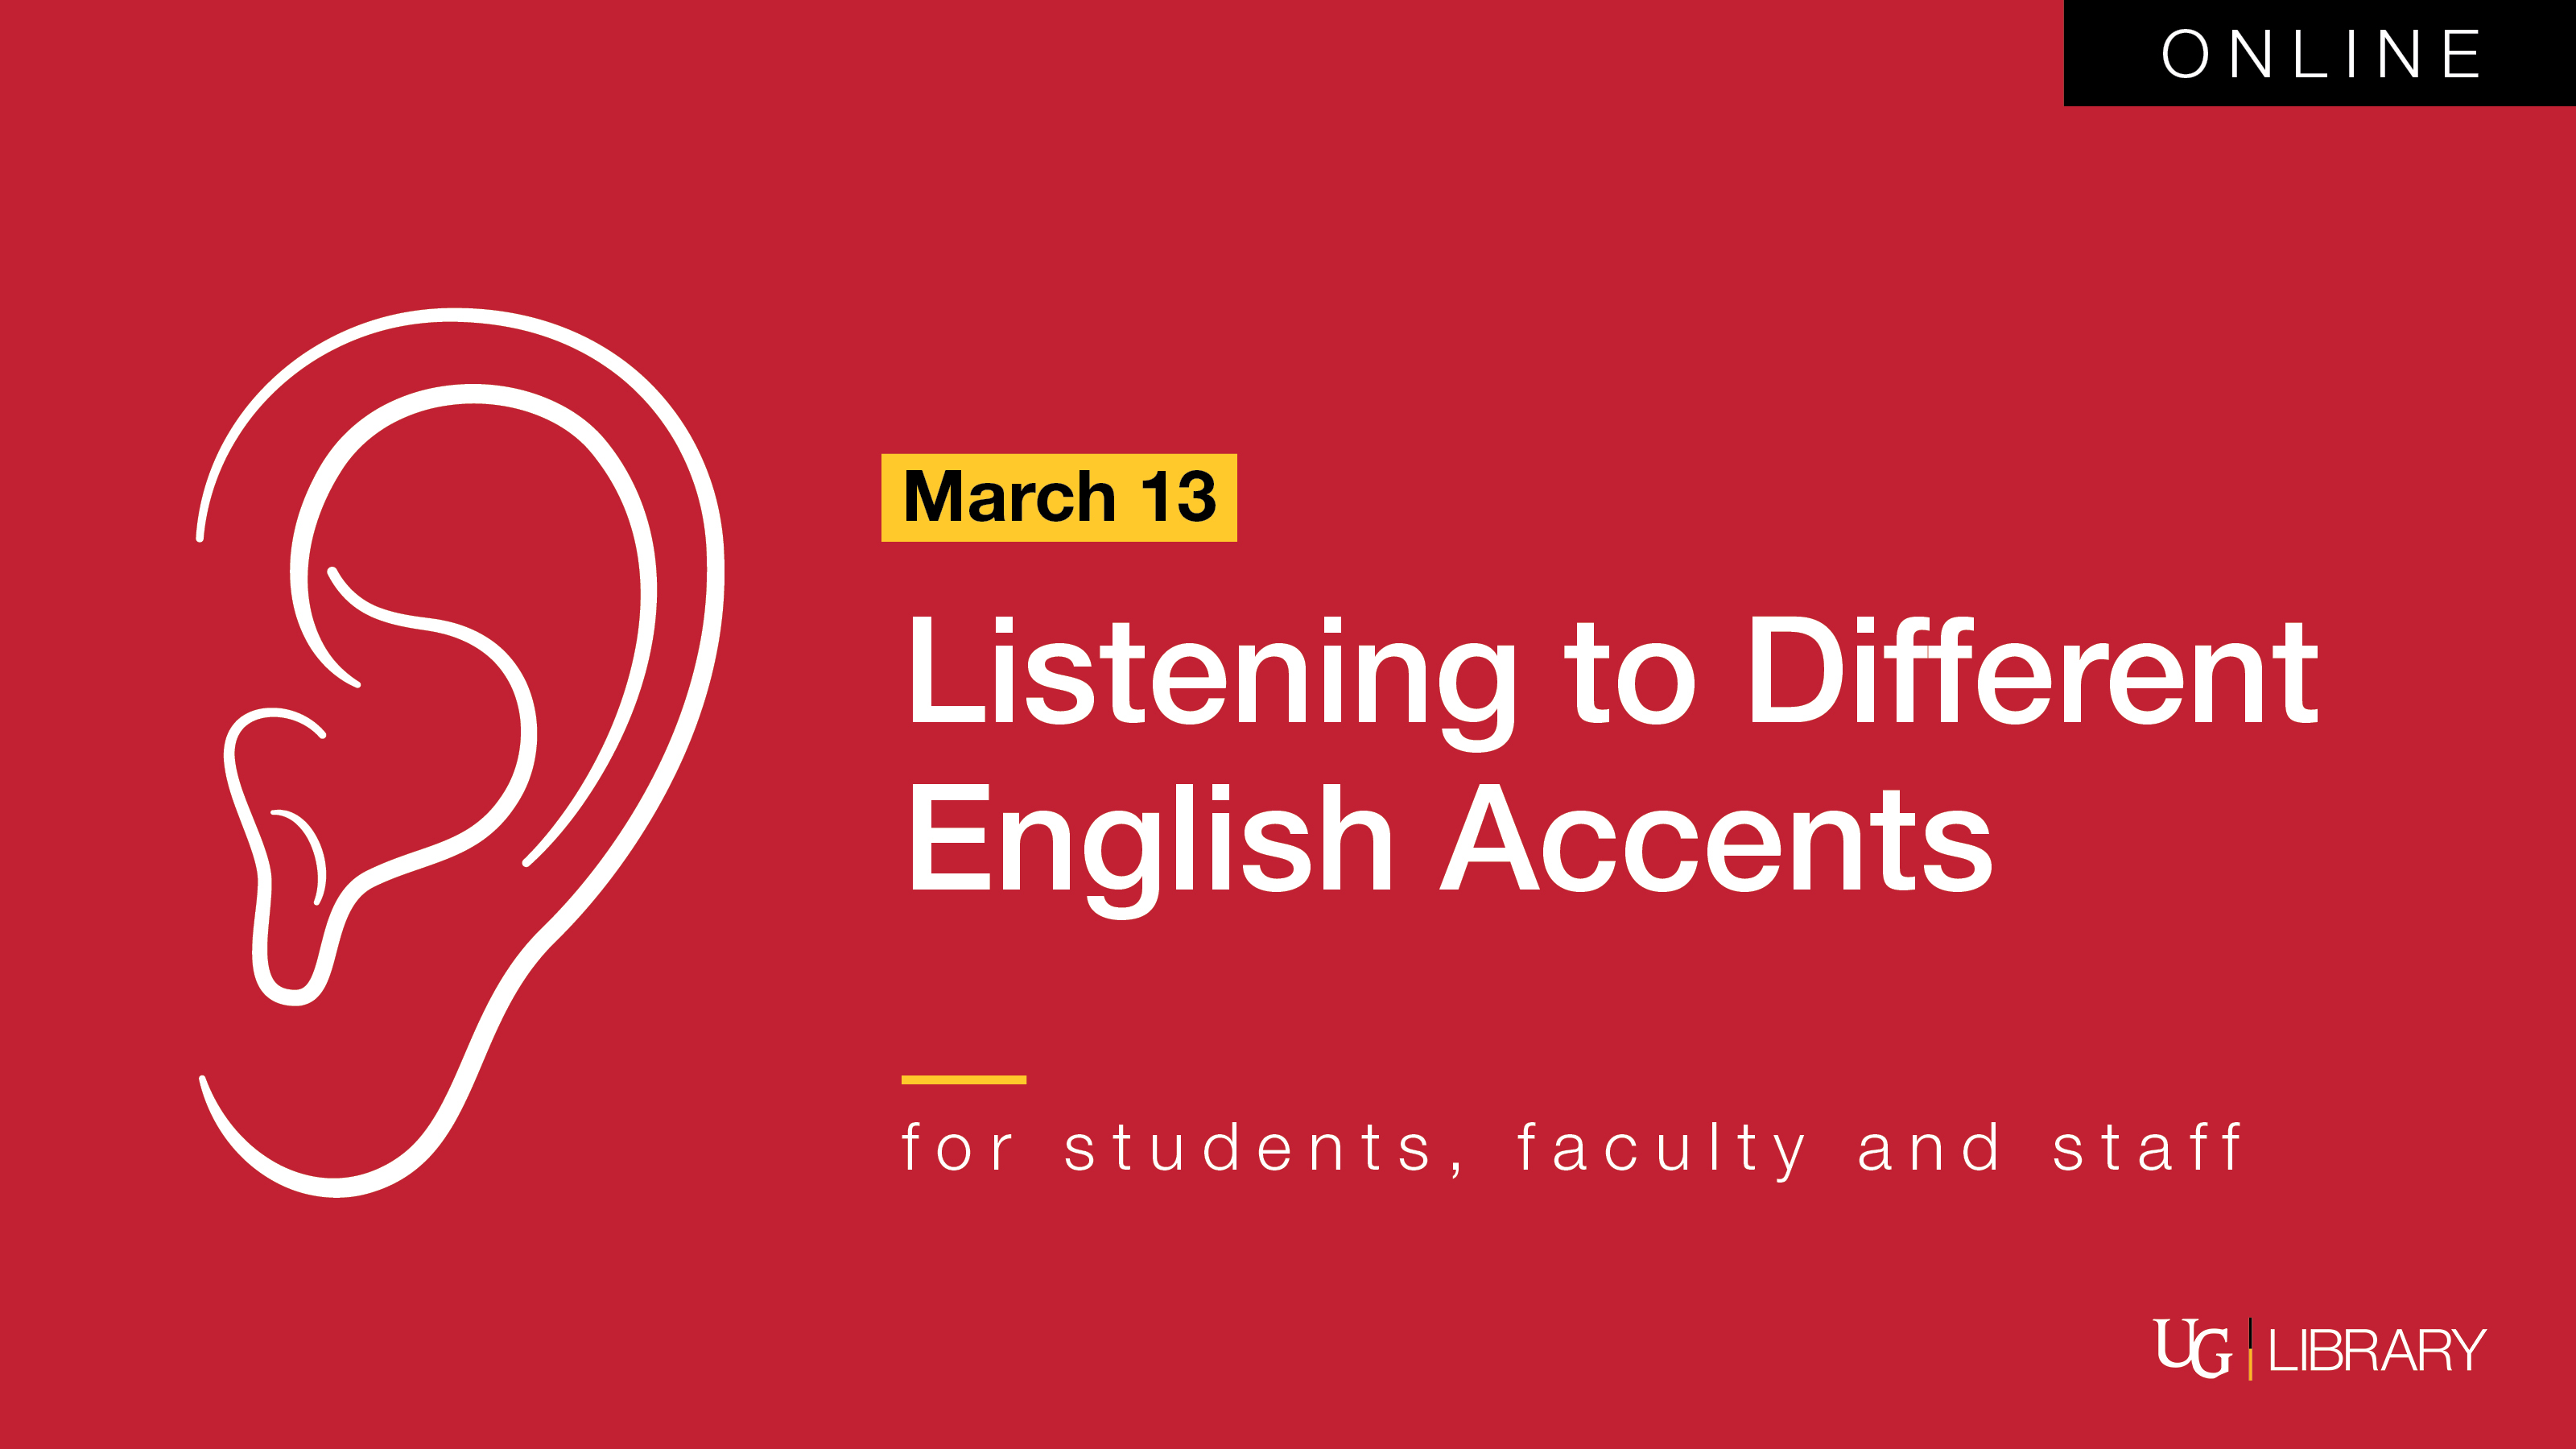 March 13 listening to different english accents. For students, faculty and staff.